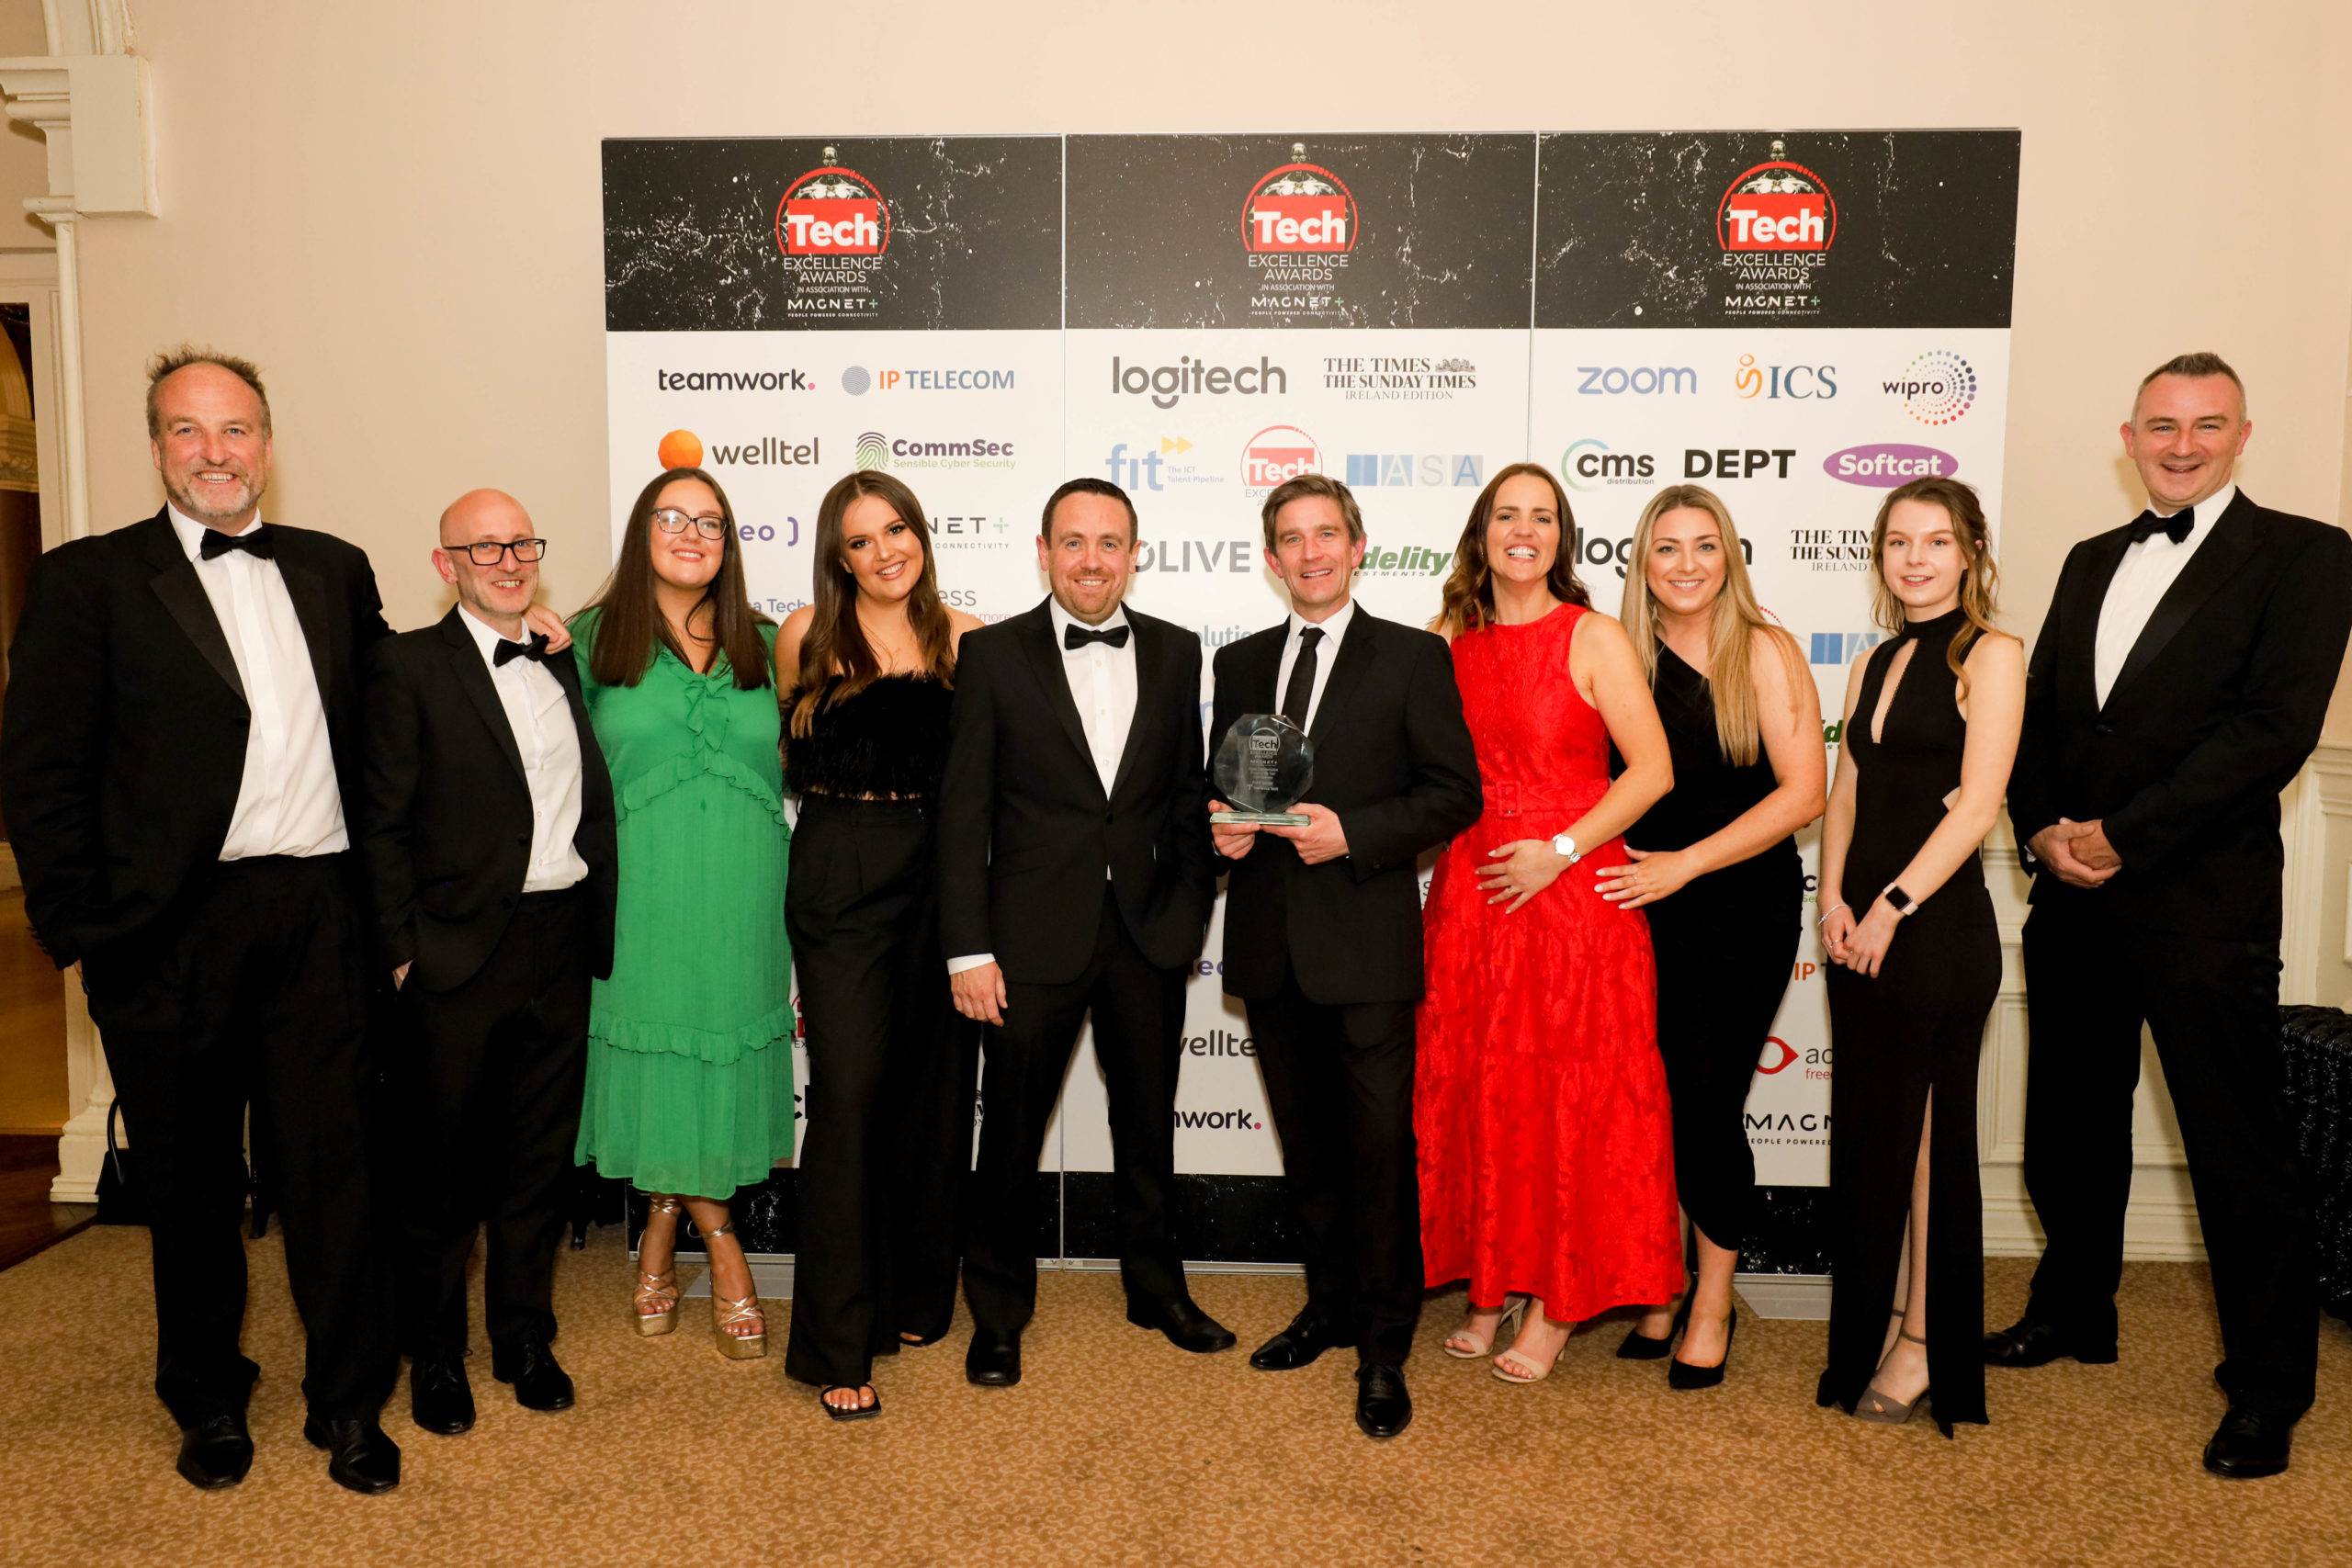 Agile Networks honoured at Annual Tech Excellence Awards for Digital Transformation Project